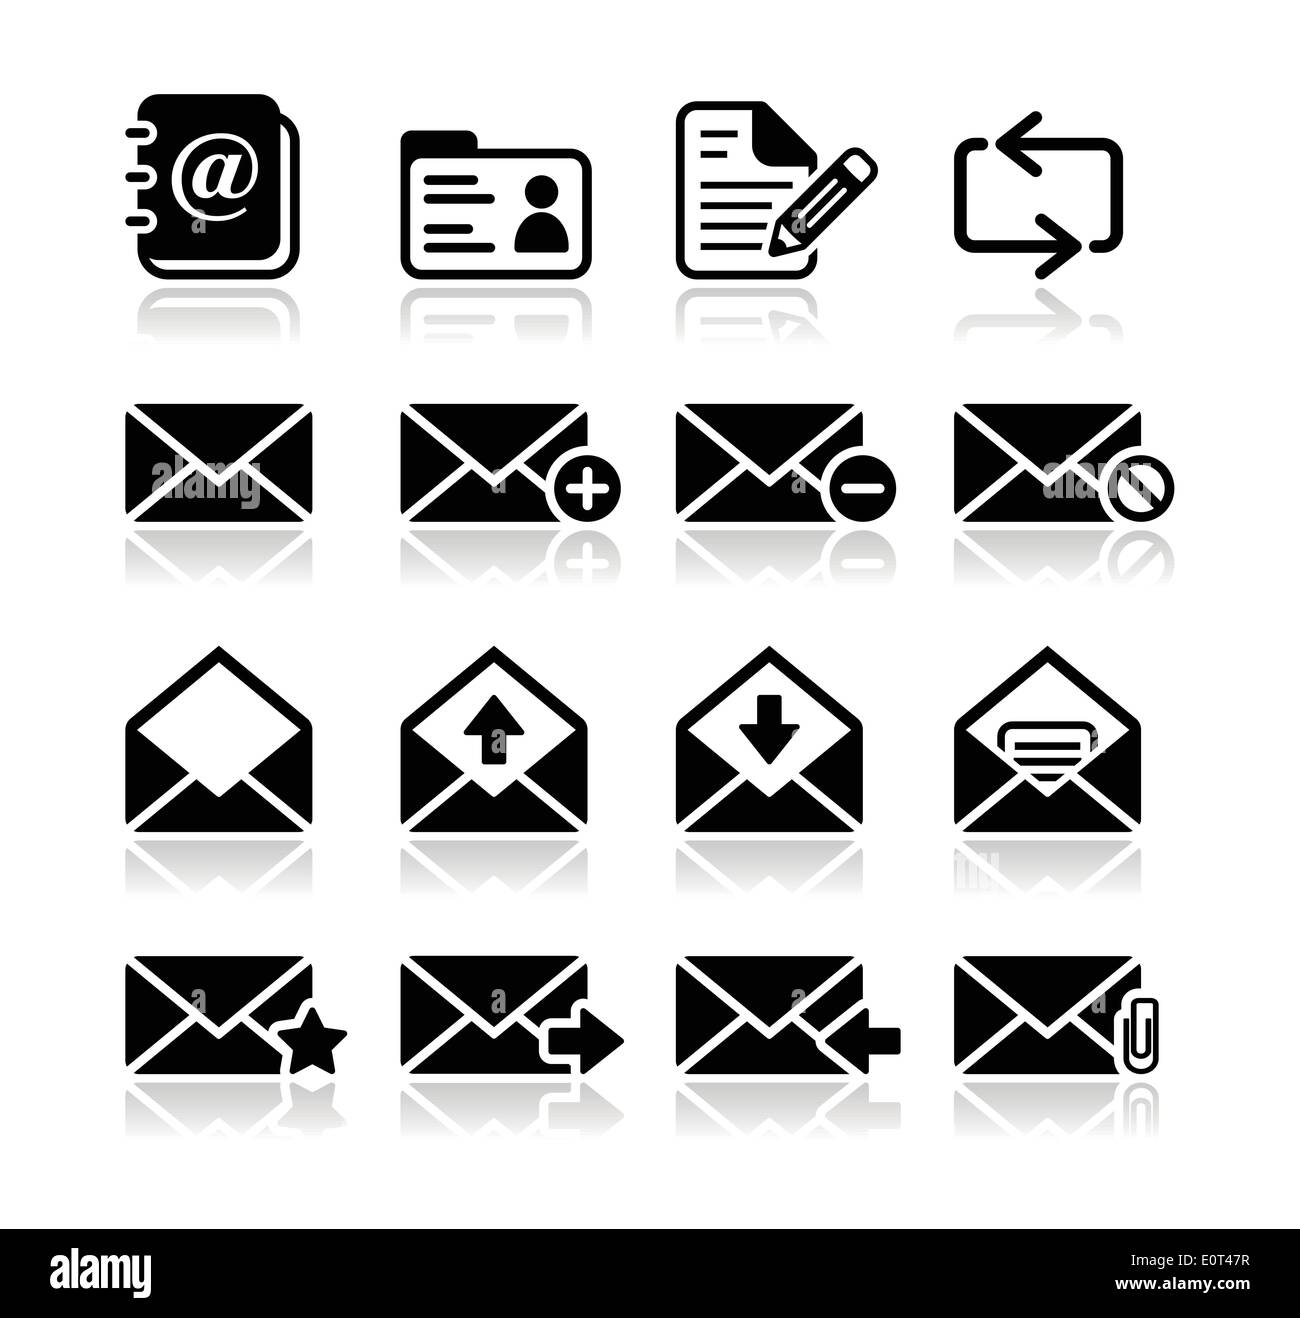 Email mailbox vector icons set Stock Vector